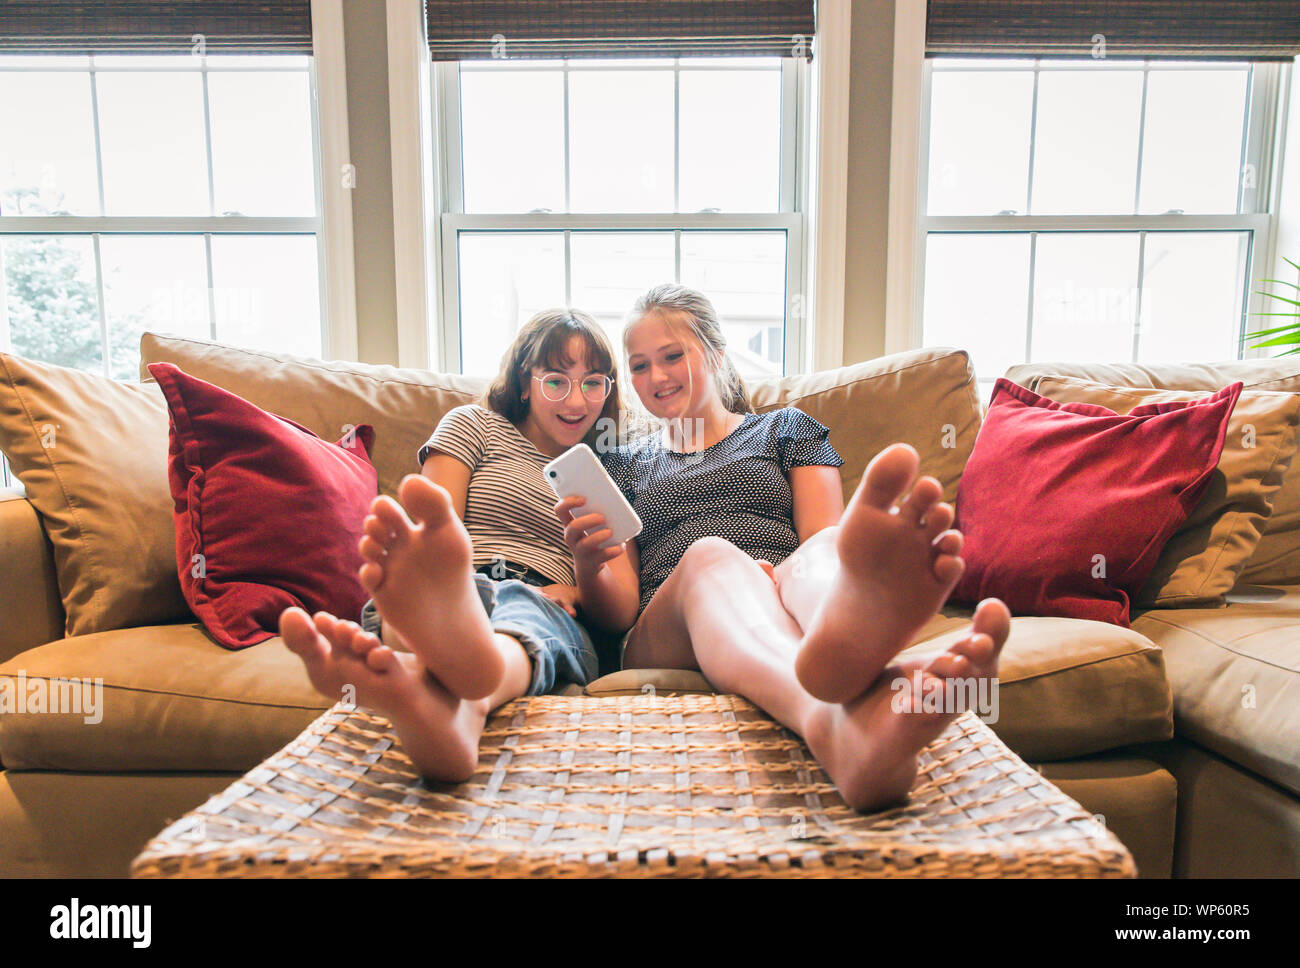 Two Teenage Girls Sitting On Couch With Feet Up Looking At Cellphone